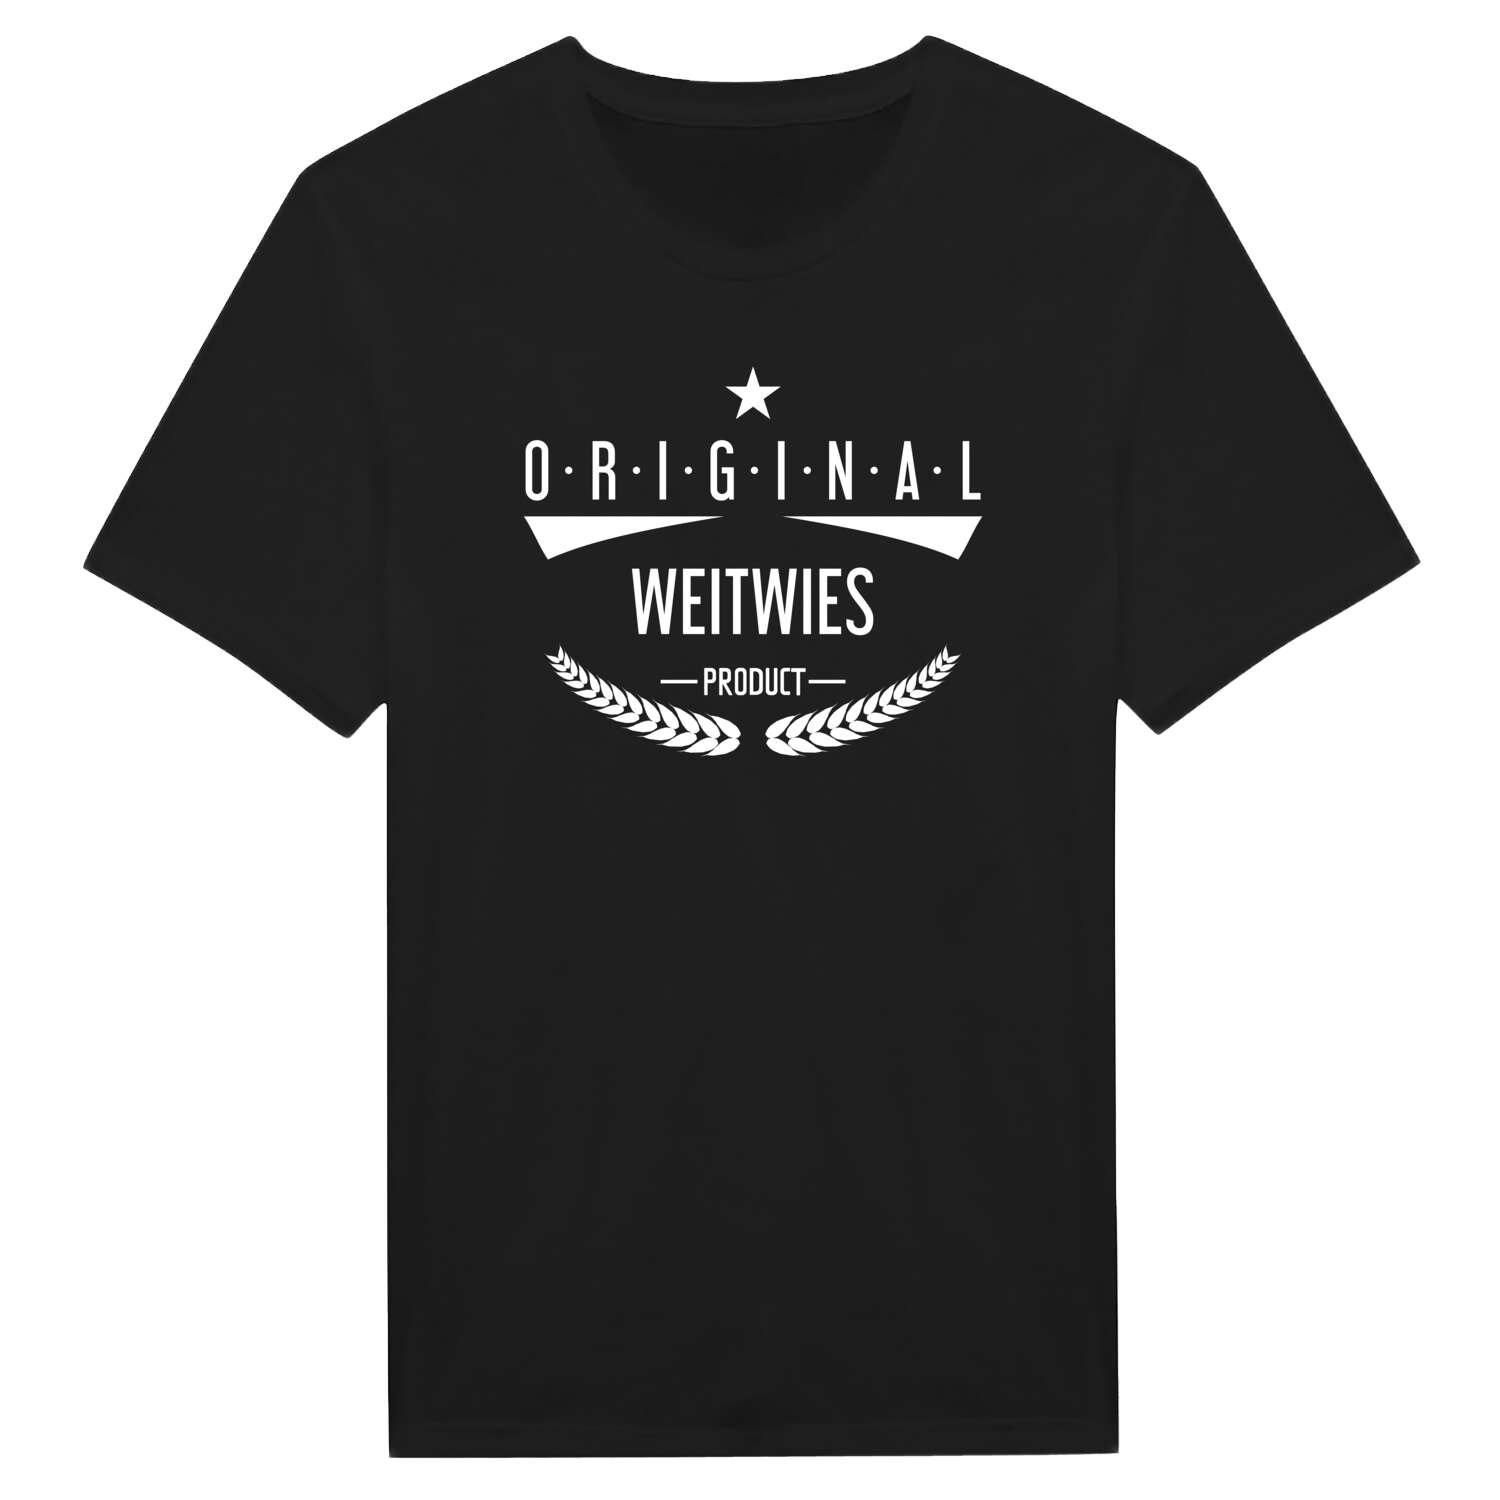 Weitwies T-Shirt »Original Product«